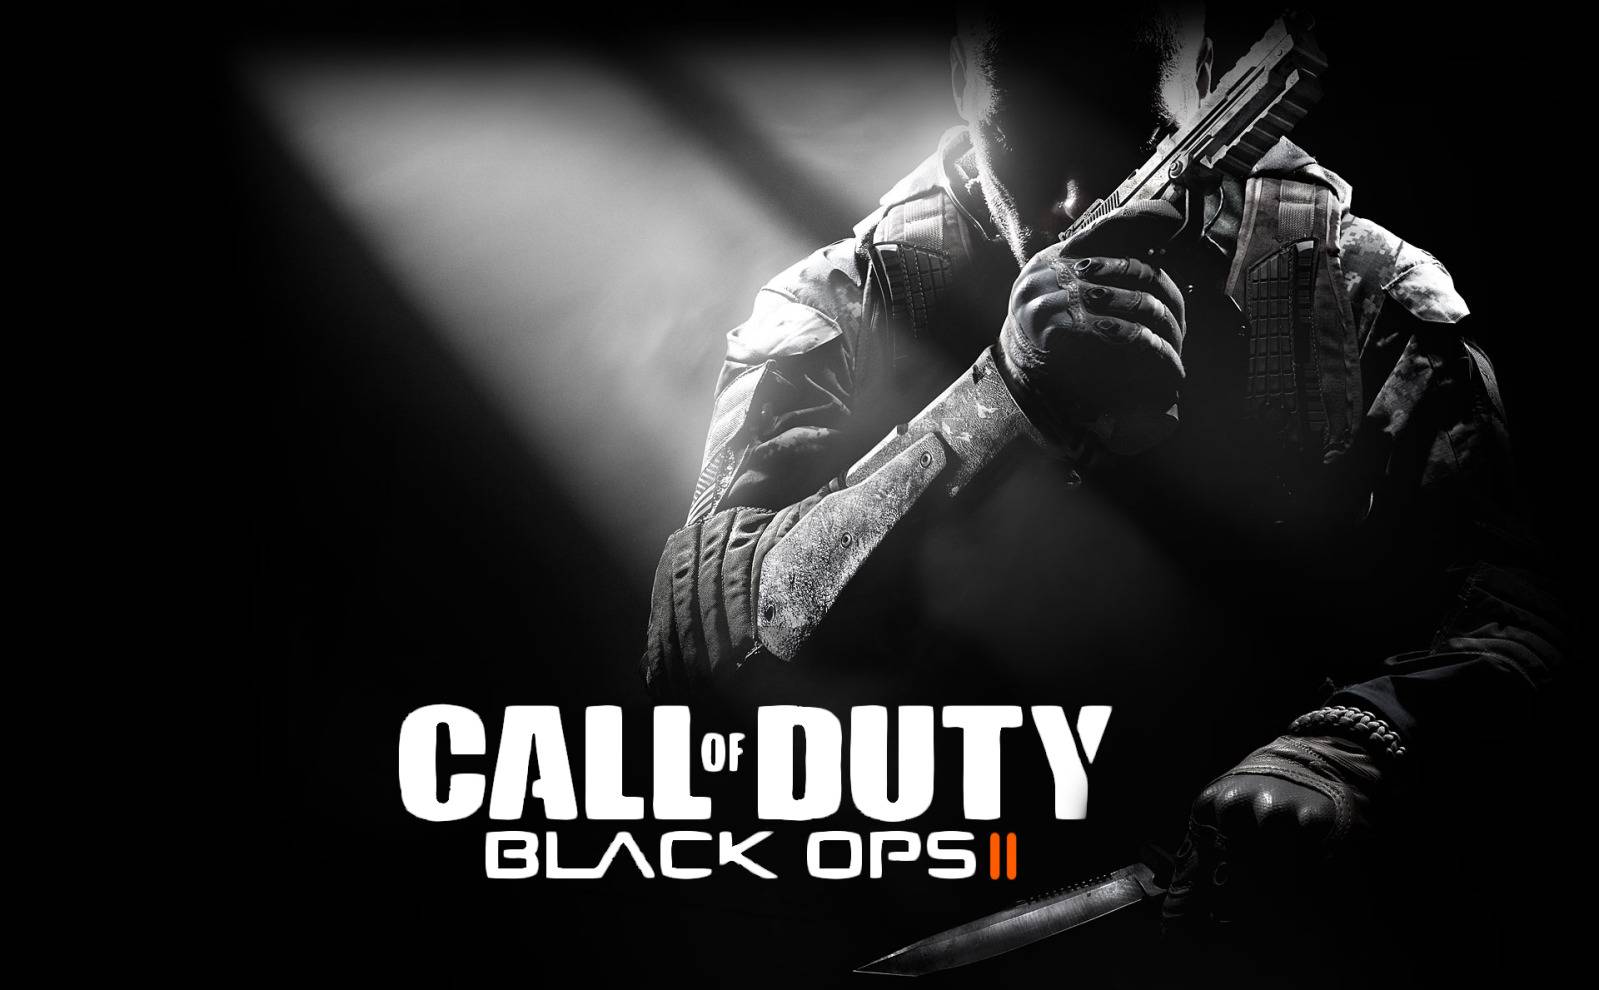 Call Of Duty Black Ops 2 Wallpapers in HD GamingBoltcom Video 1599x990